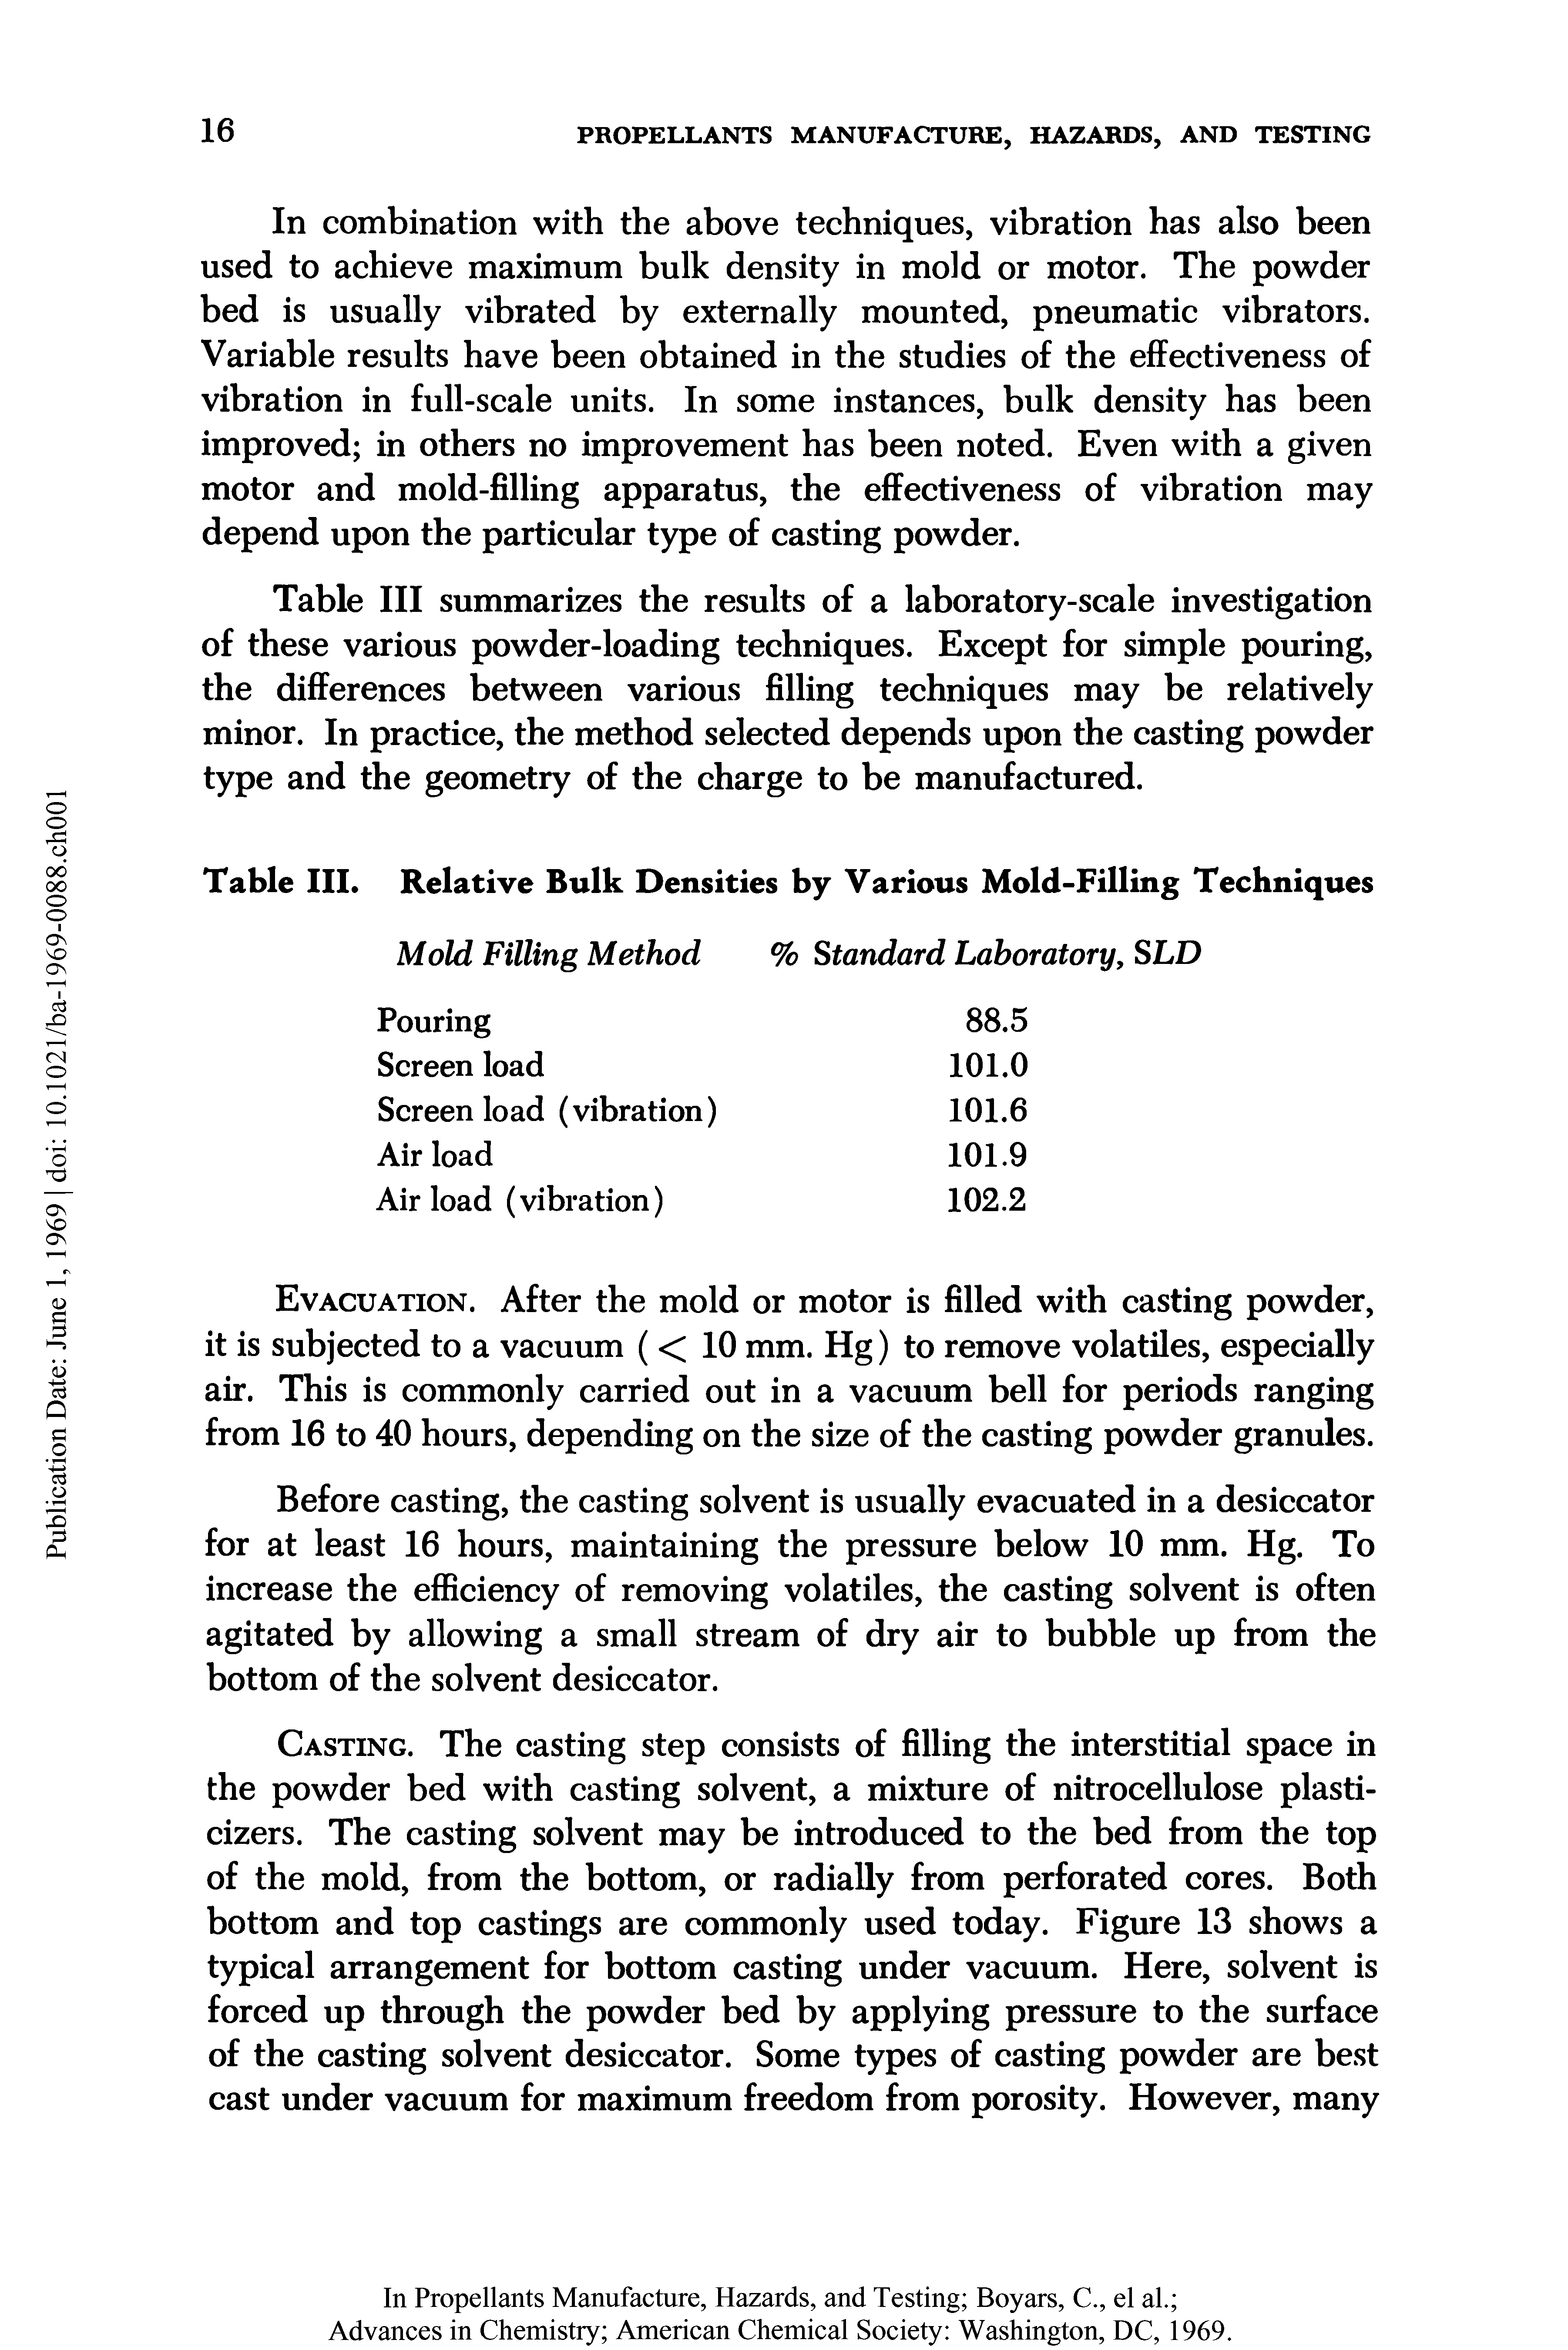 Table III summarizes the results of a laboratory-scale investigation of these various powder-loading techniques. Except for simple pouring, the differences between various filling techniques may be relatively minor. In practice, the method selected depends upon the casting powder type and the geometry of the charge to be manufactured.